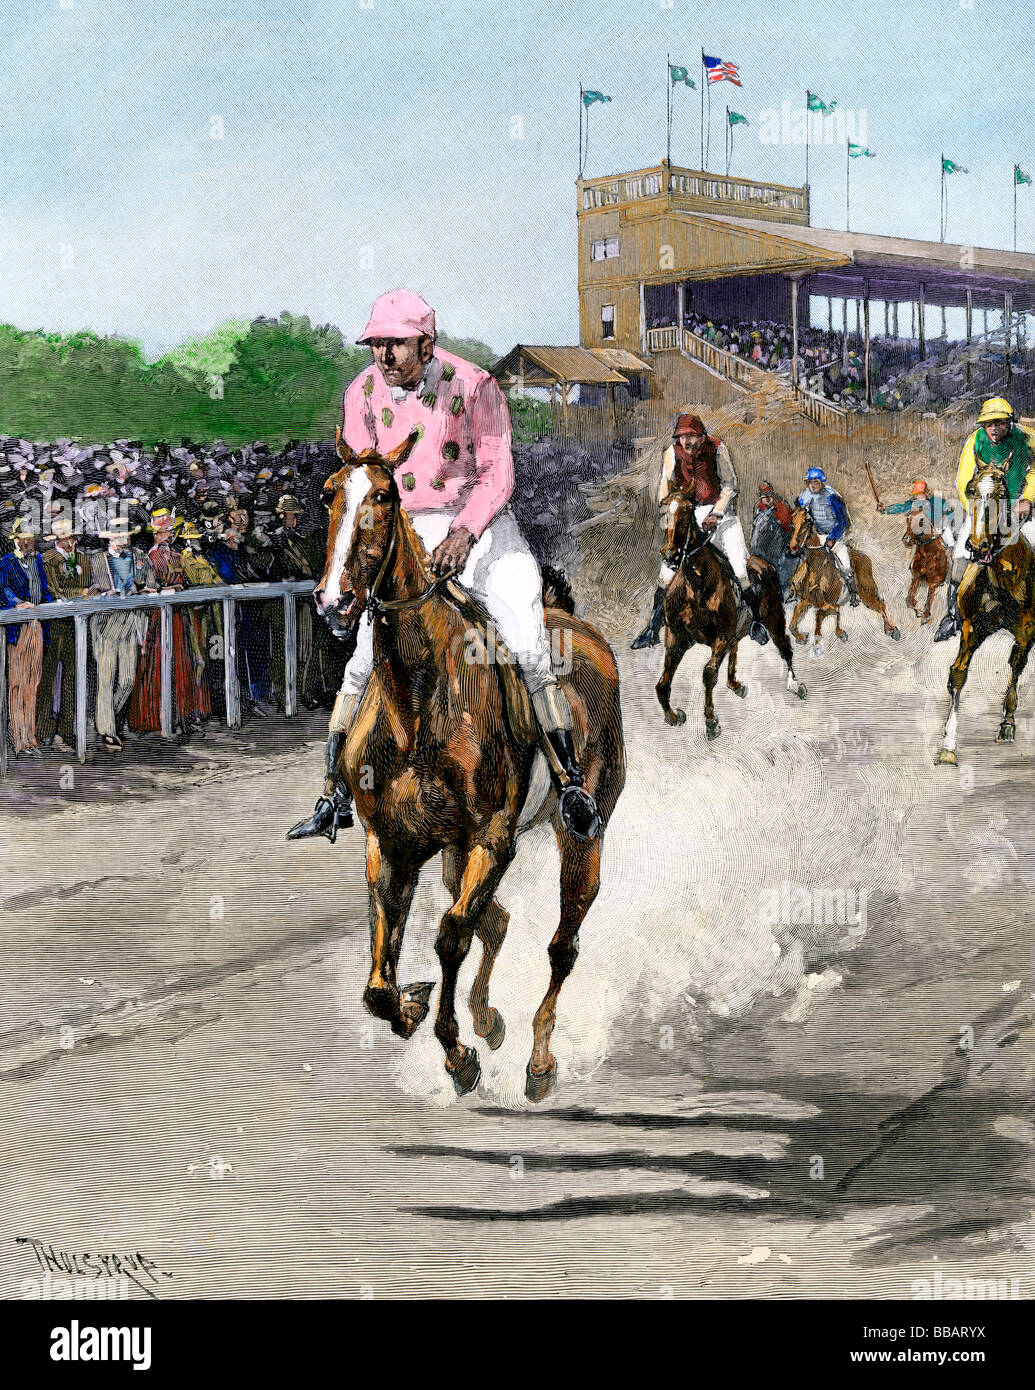 American race track 1880s. Hand-colored halftone of an illustration Stock Photo